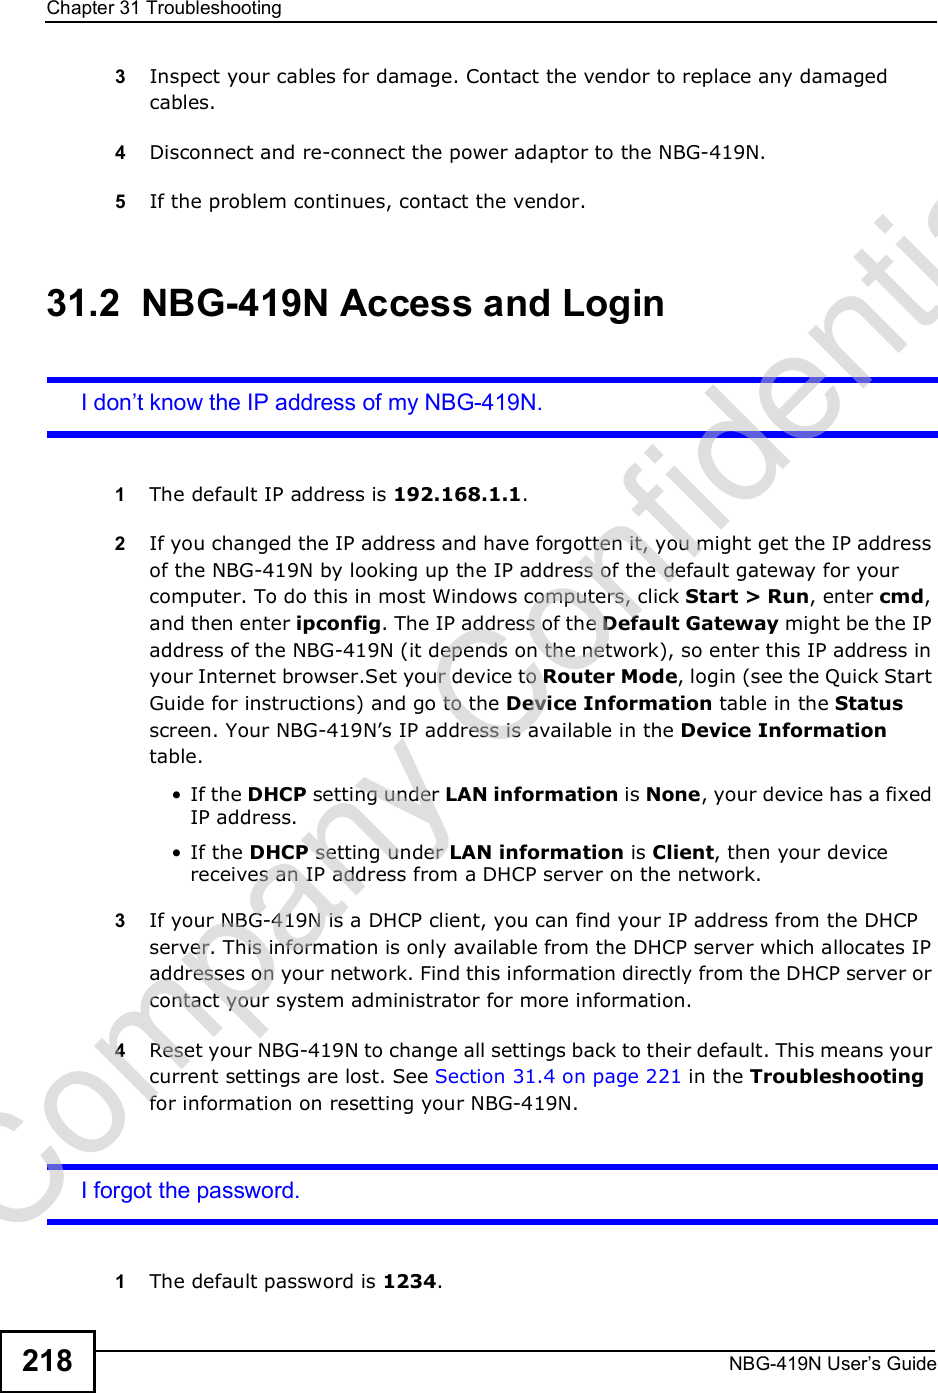 Chapter 31TroubleshootingNBG-419N User s Guide2183Inspect your cables for damage. Contact the vendor to replace any damaged cables.4Disconnect and re-connect the power adaptor to the NBG-419N. 5If the problem continues, contact the vendor.31.2  NBG-419N Access and LoginI don t know the IP address of my NBG-419N.1The default IP address is 192.168.1.1.2If you changed the IP address and have forgotten it, you might get the IP address of the NBG-419N by looking up the IP address of the default gateway for your computer. To do this in most Windows computers, click Start &gt; Run, enter cmd, and then enter ipconfig. The IP address of the Default Gateway might be the IP address of the NBG-419N (it depends on the network), so enter this IP address in your Internet browser.Set your device to Router Mode, login (see the Quick Start Guide for instructions) and go to the Device Information table in the Status screen. Your NBG-419N!s IP address is available in the Device Information table.  If the DHCP setting under LAN information is None, your device has a fixed IP address.  If the DHCP setting under LAN information is Client, then your device receives an IP address from a DHCP server on the network. 3If your NBG-419N is a DHCP client, you can find your IP address from the DHCP server. This information is only available from the DHCP server which allocates IP addresses on your network. Find this information directly from the DHCP server or contact your system administrator for more information.4Reset your NBG-419N to change all settings back to their default. This means your current settings are lost. See Section 31.4 on page 221 in the Troubleshooting for information on resetting your NBG-419N. I forgot the password.1The default password is 1234.Company Confidential